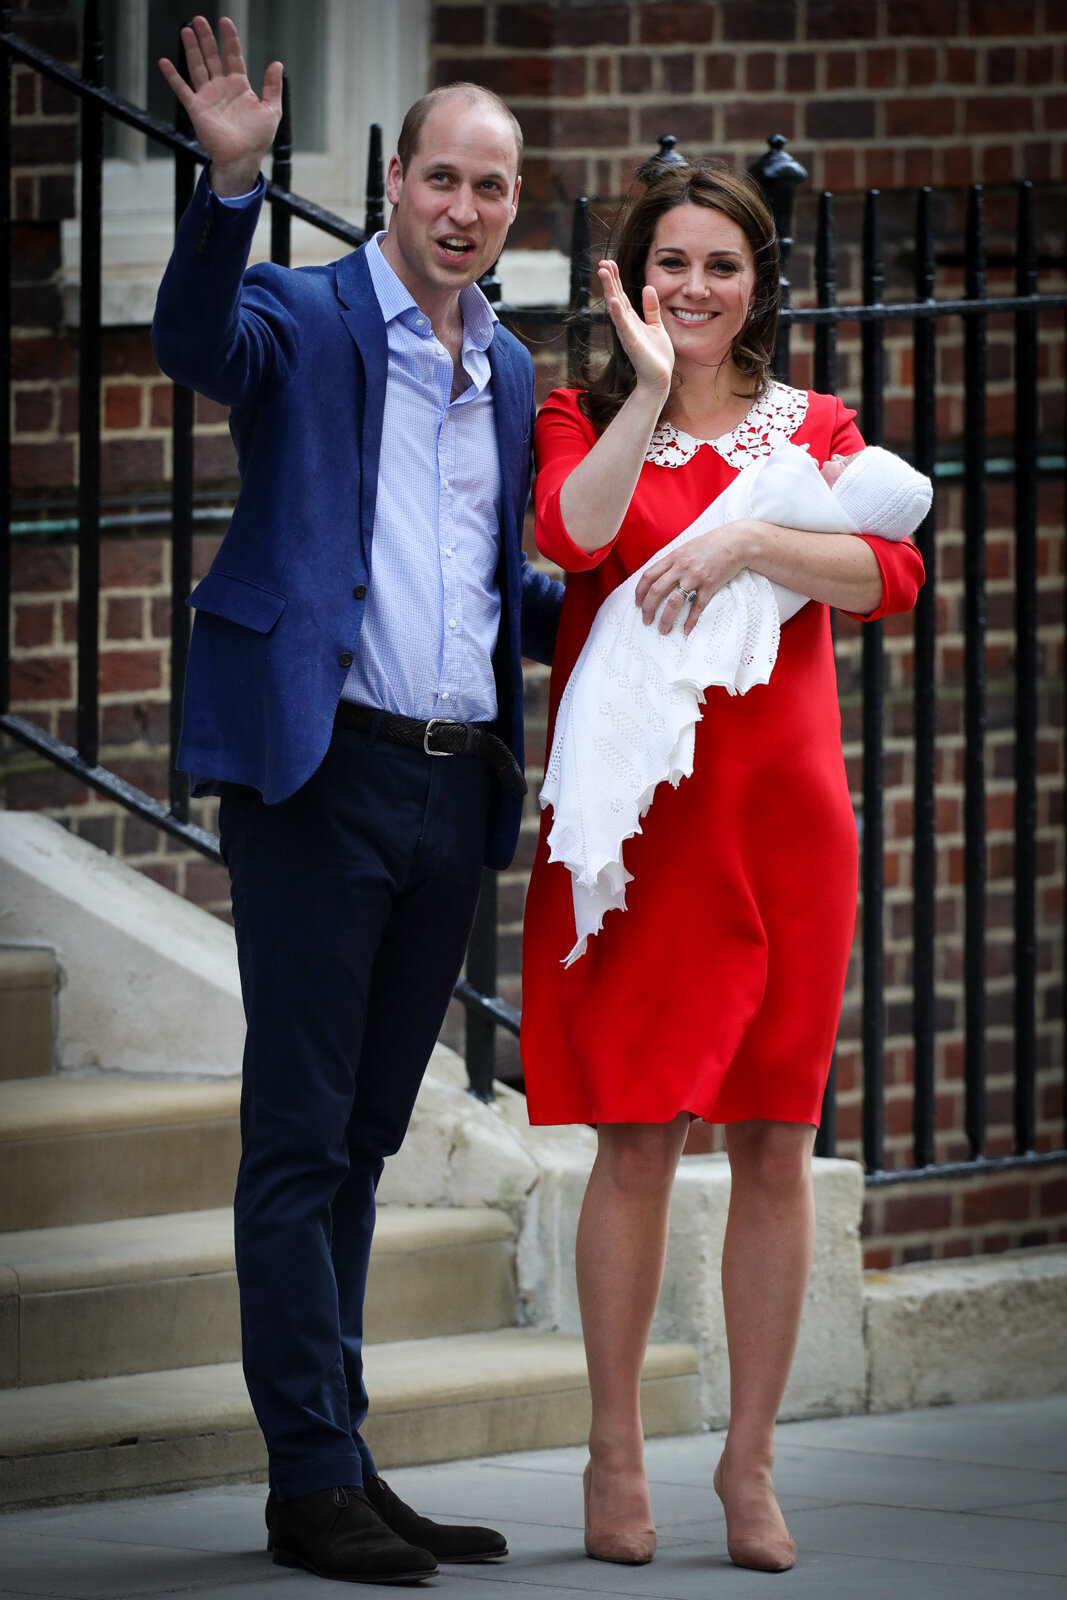  The Duke and Duchess of Cambridge and their newborn son Prince Louis outside the Lindo Wing at St Mary's Hospital in Paddington, London. Picture by: Aaron Chown/PA Images. Date taken: 23-Apr-2018 